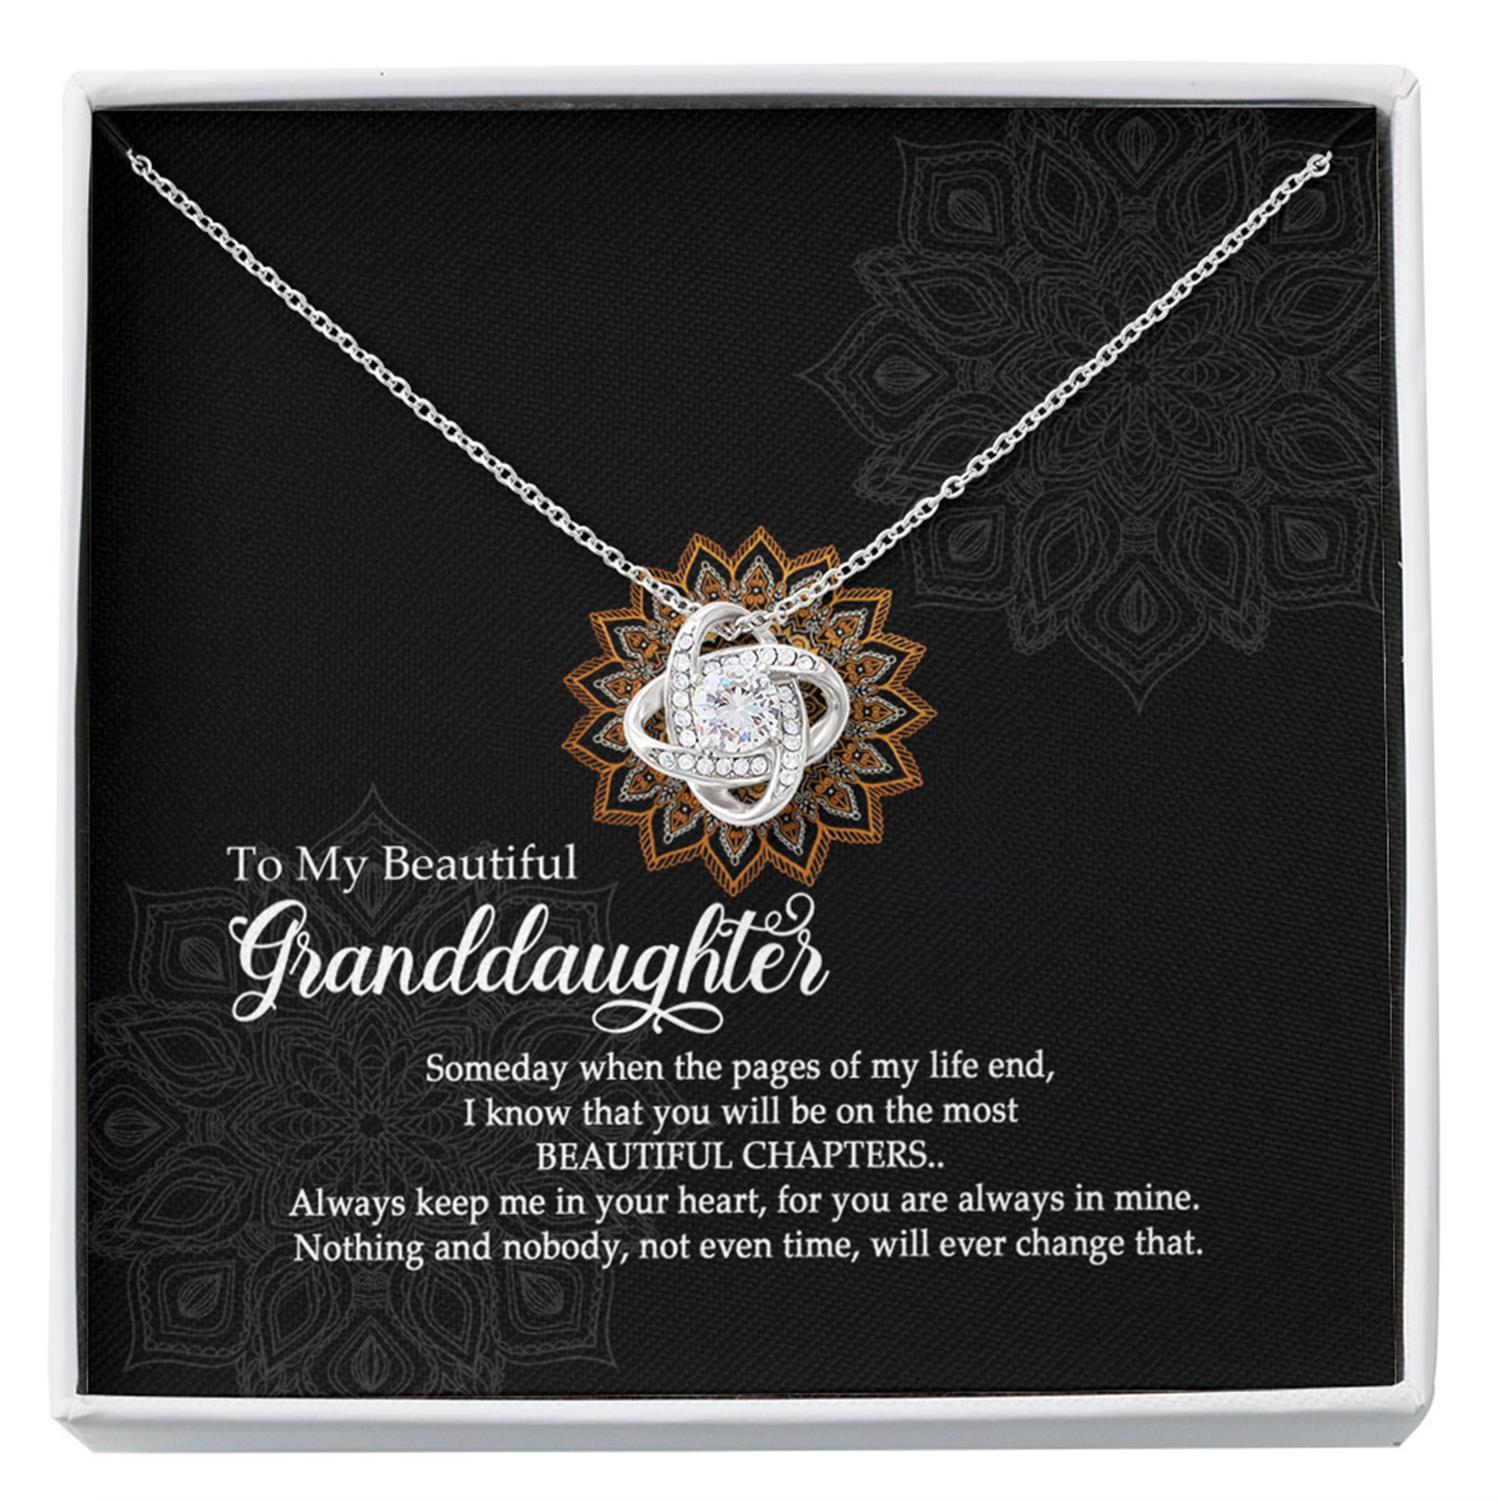 Granddaughter Necklace, To My Beautiful Granddaughter Necklace Gift From Grandma - Someday When The Pages Of My Life End Custom Necklace